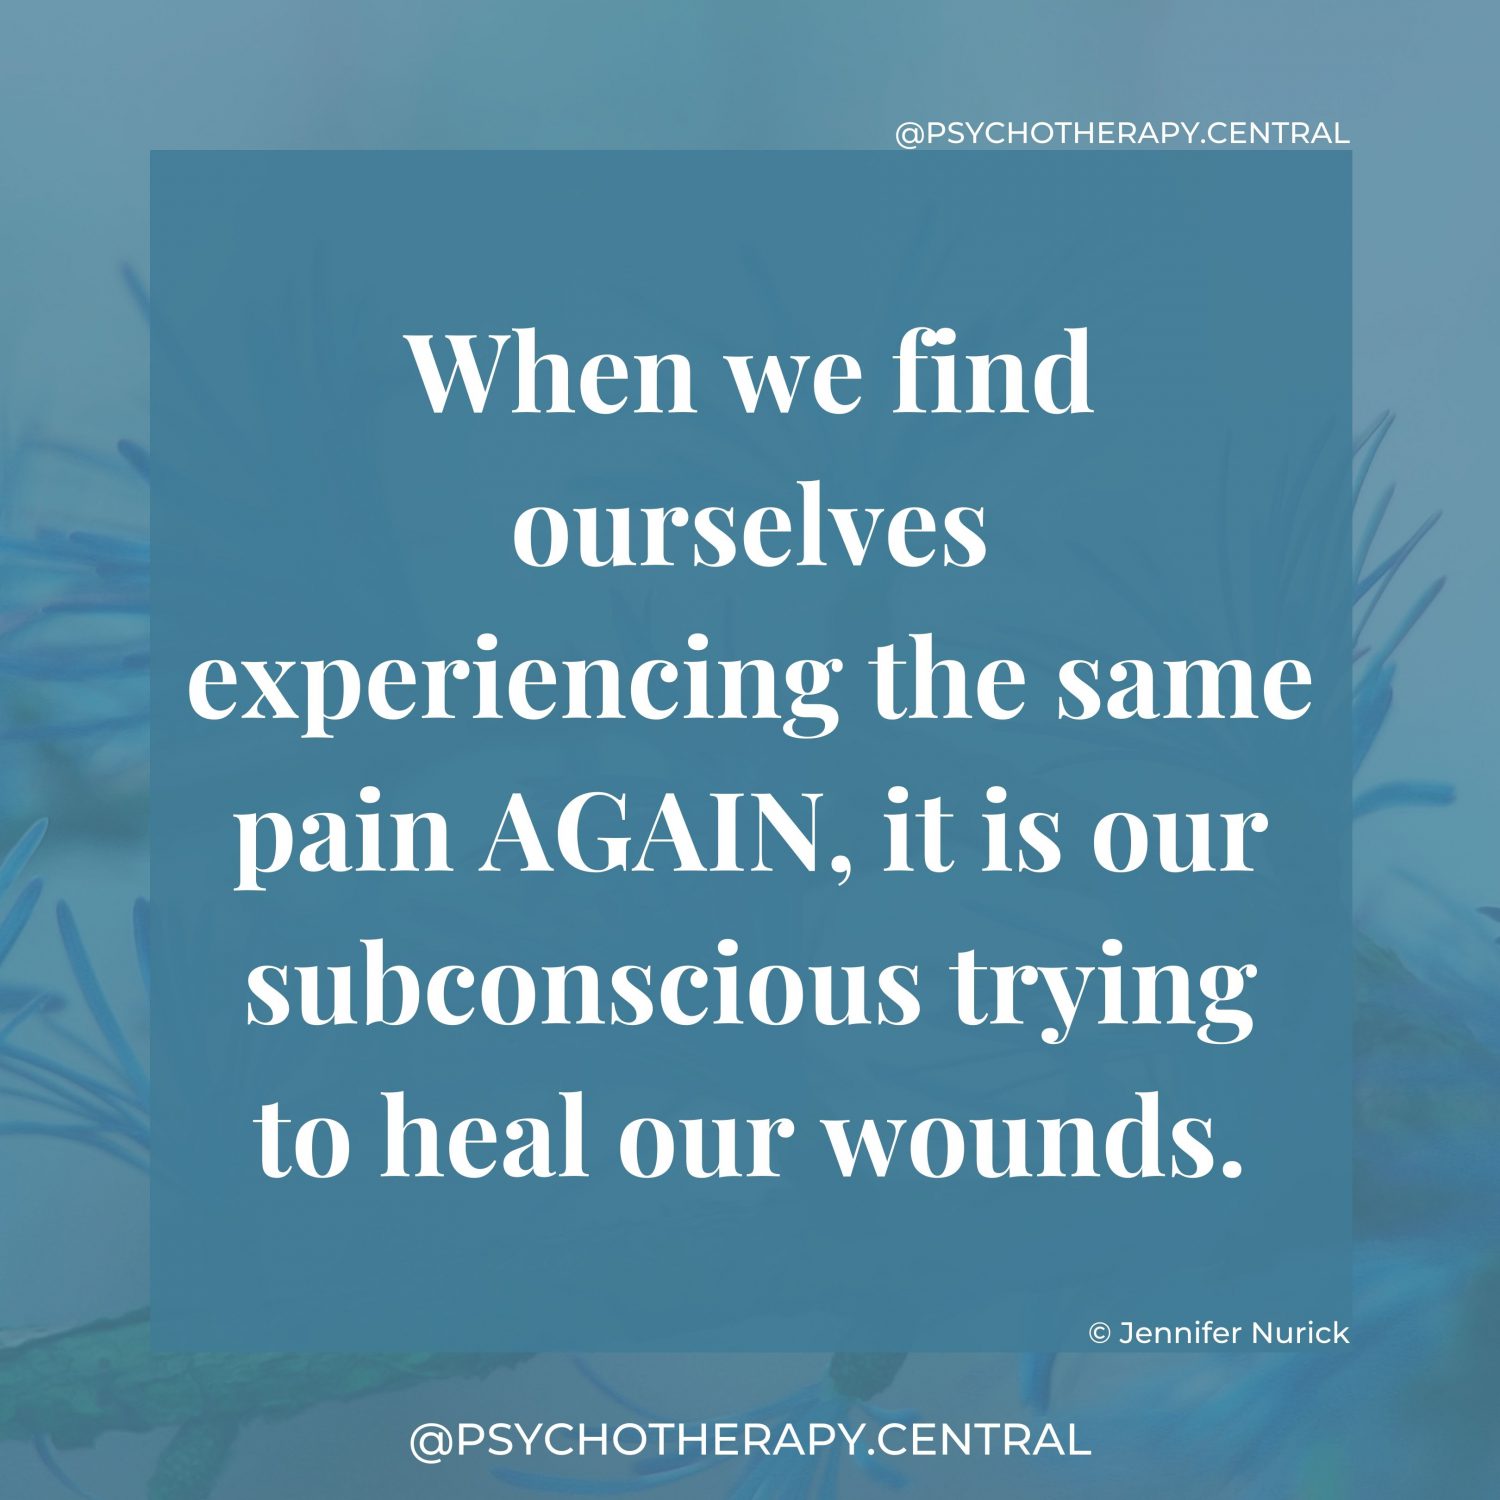 When we find ourselves experiencing the same pain AGAIN, it is our subconscious trying to heal our wounds.